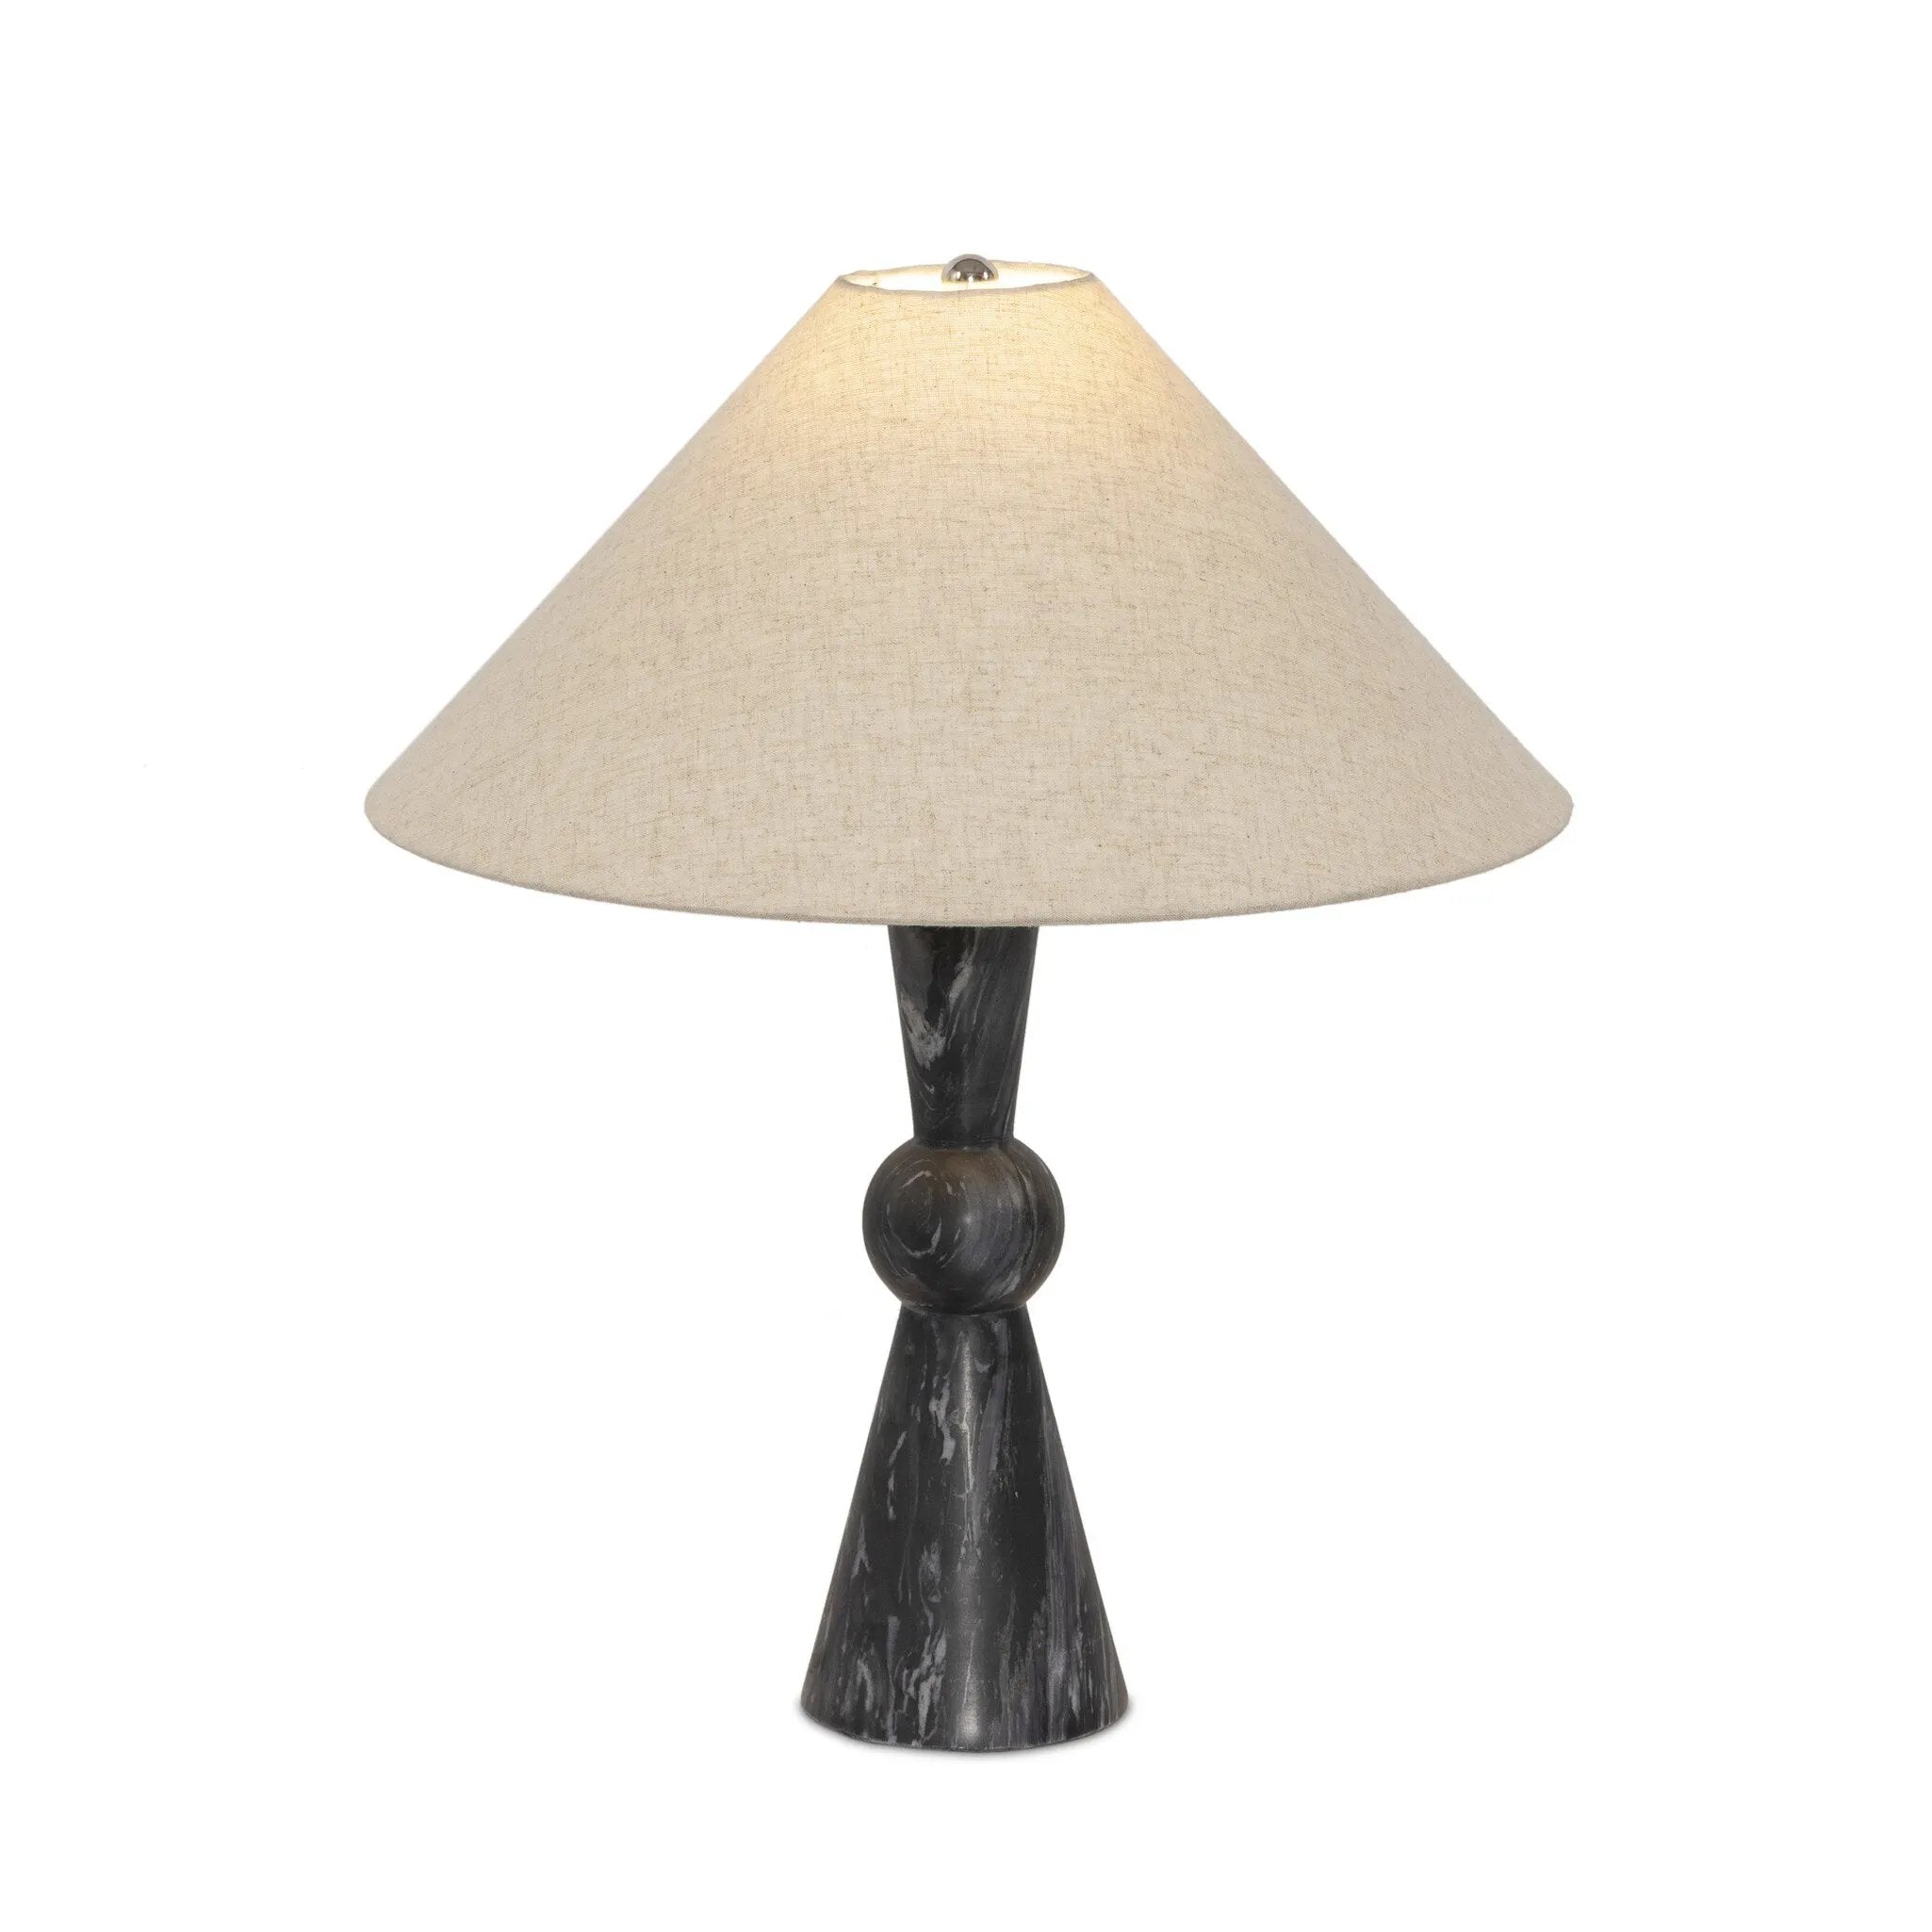 Polished forms define this sculptural table lamp, featuring a base of black Italian marble with distinctive white veining and a tapered flax linen shade.Collection: Ashe Amethyst Home provides interior design, new home construction design consulting, vintage area rugs, and lighting in the Houston metro area.